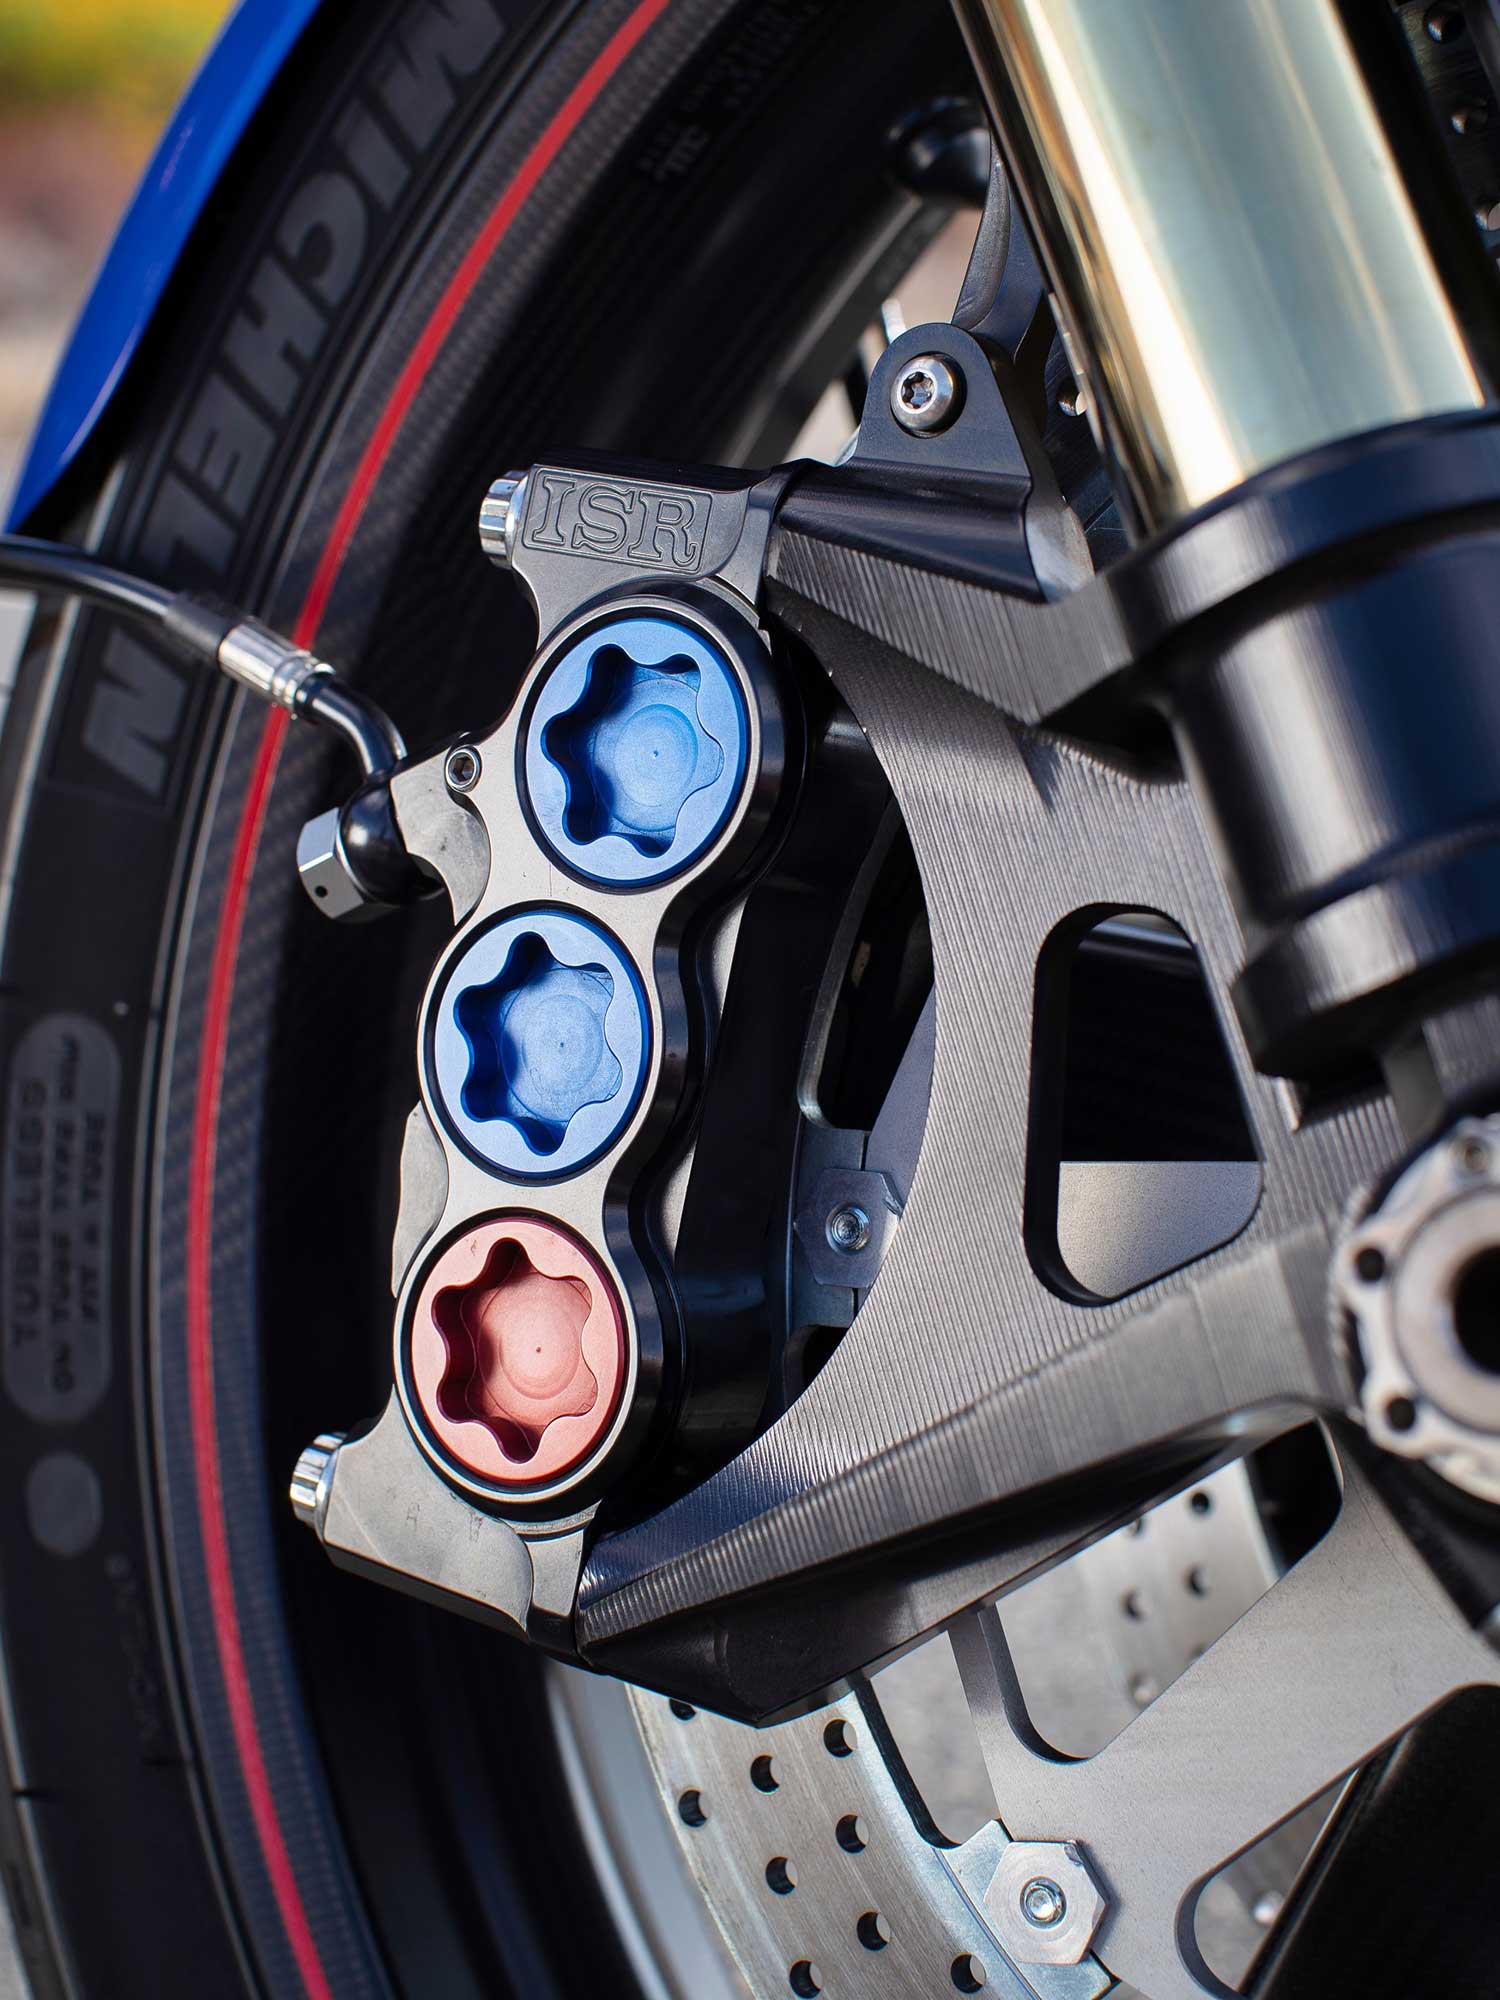 The ISR six-piston front brake calipers bring an increased piston diameter for more stopping power. The 48mm Öhlins fork is fully adjustable too.